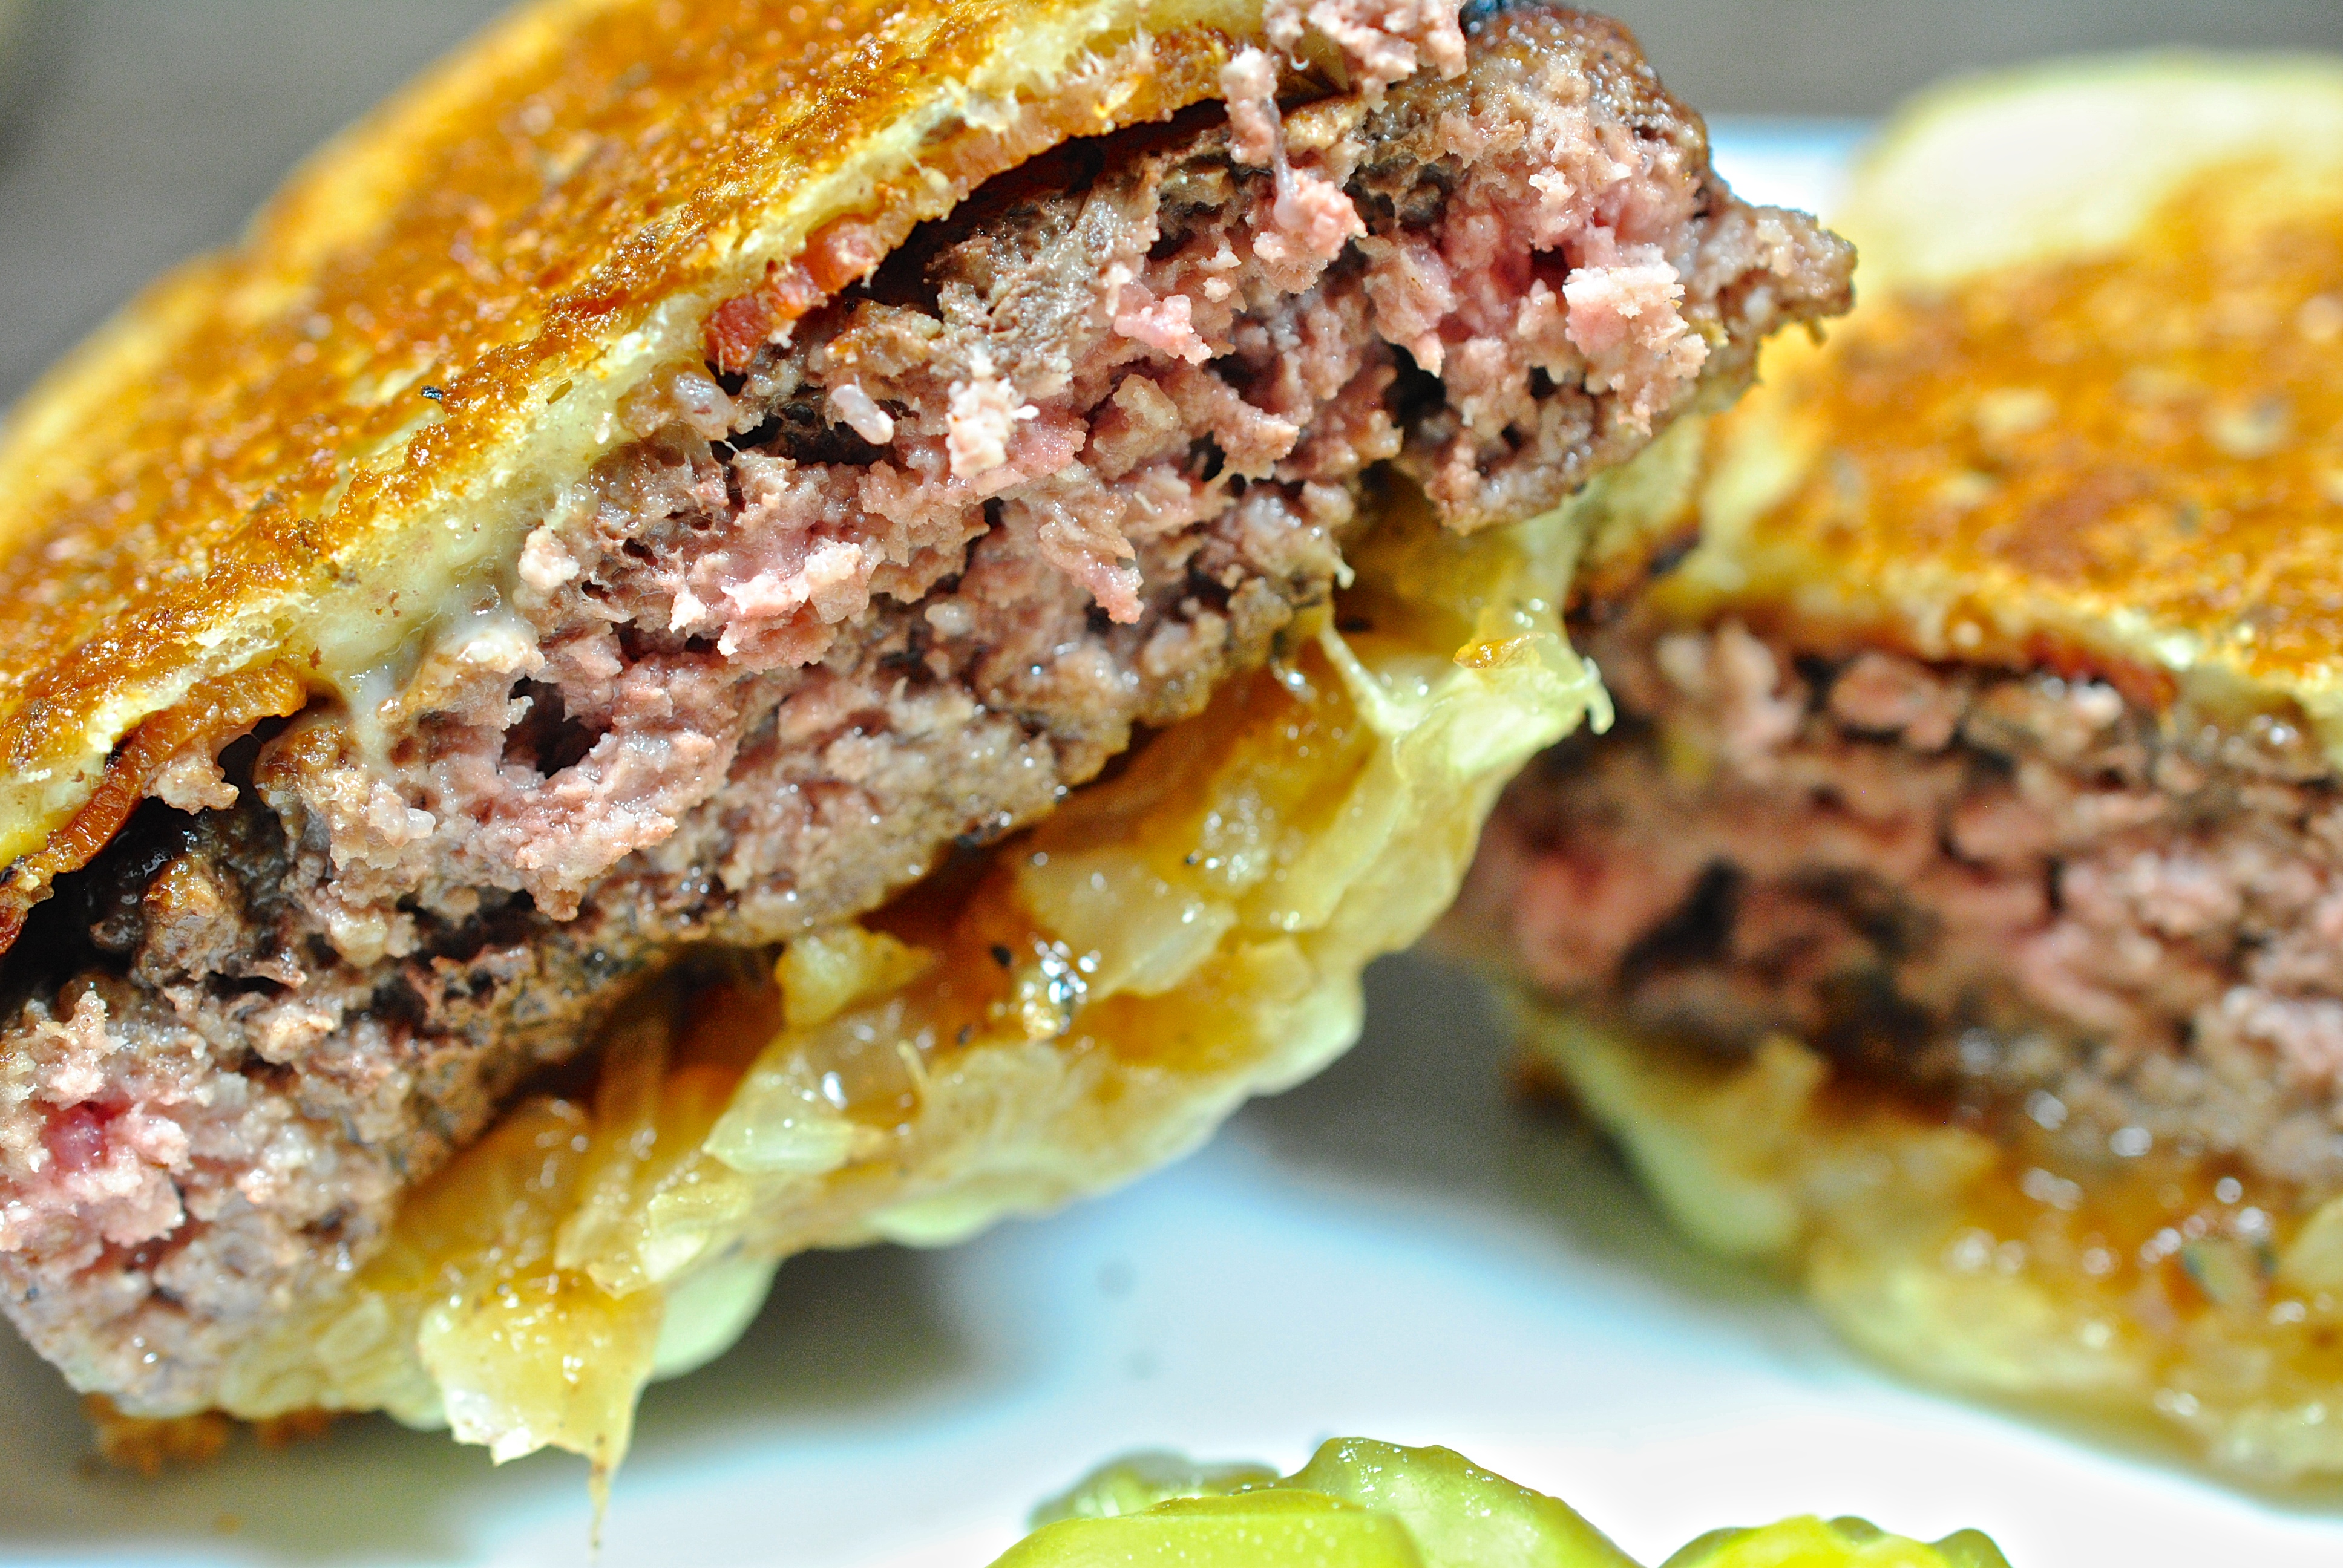 Cook's country ultimate patty melt